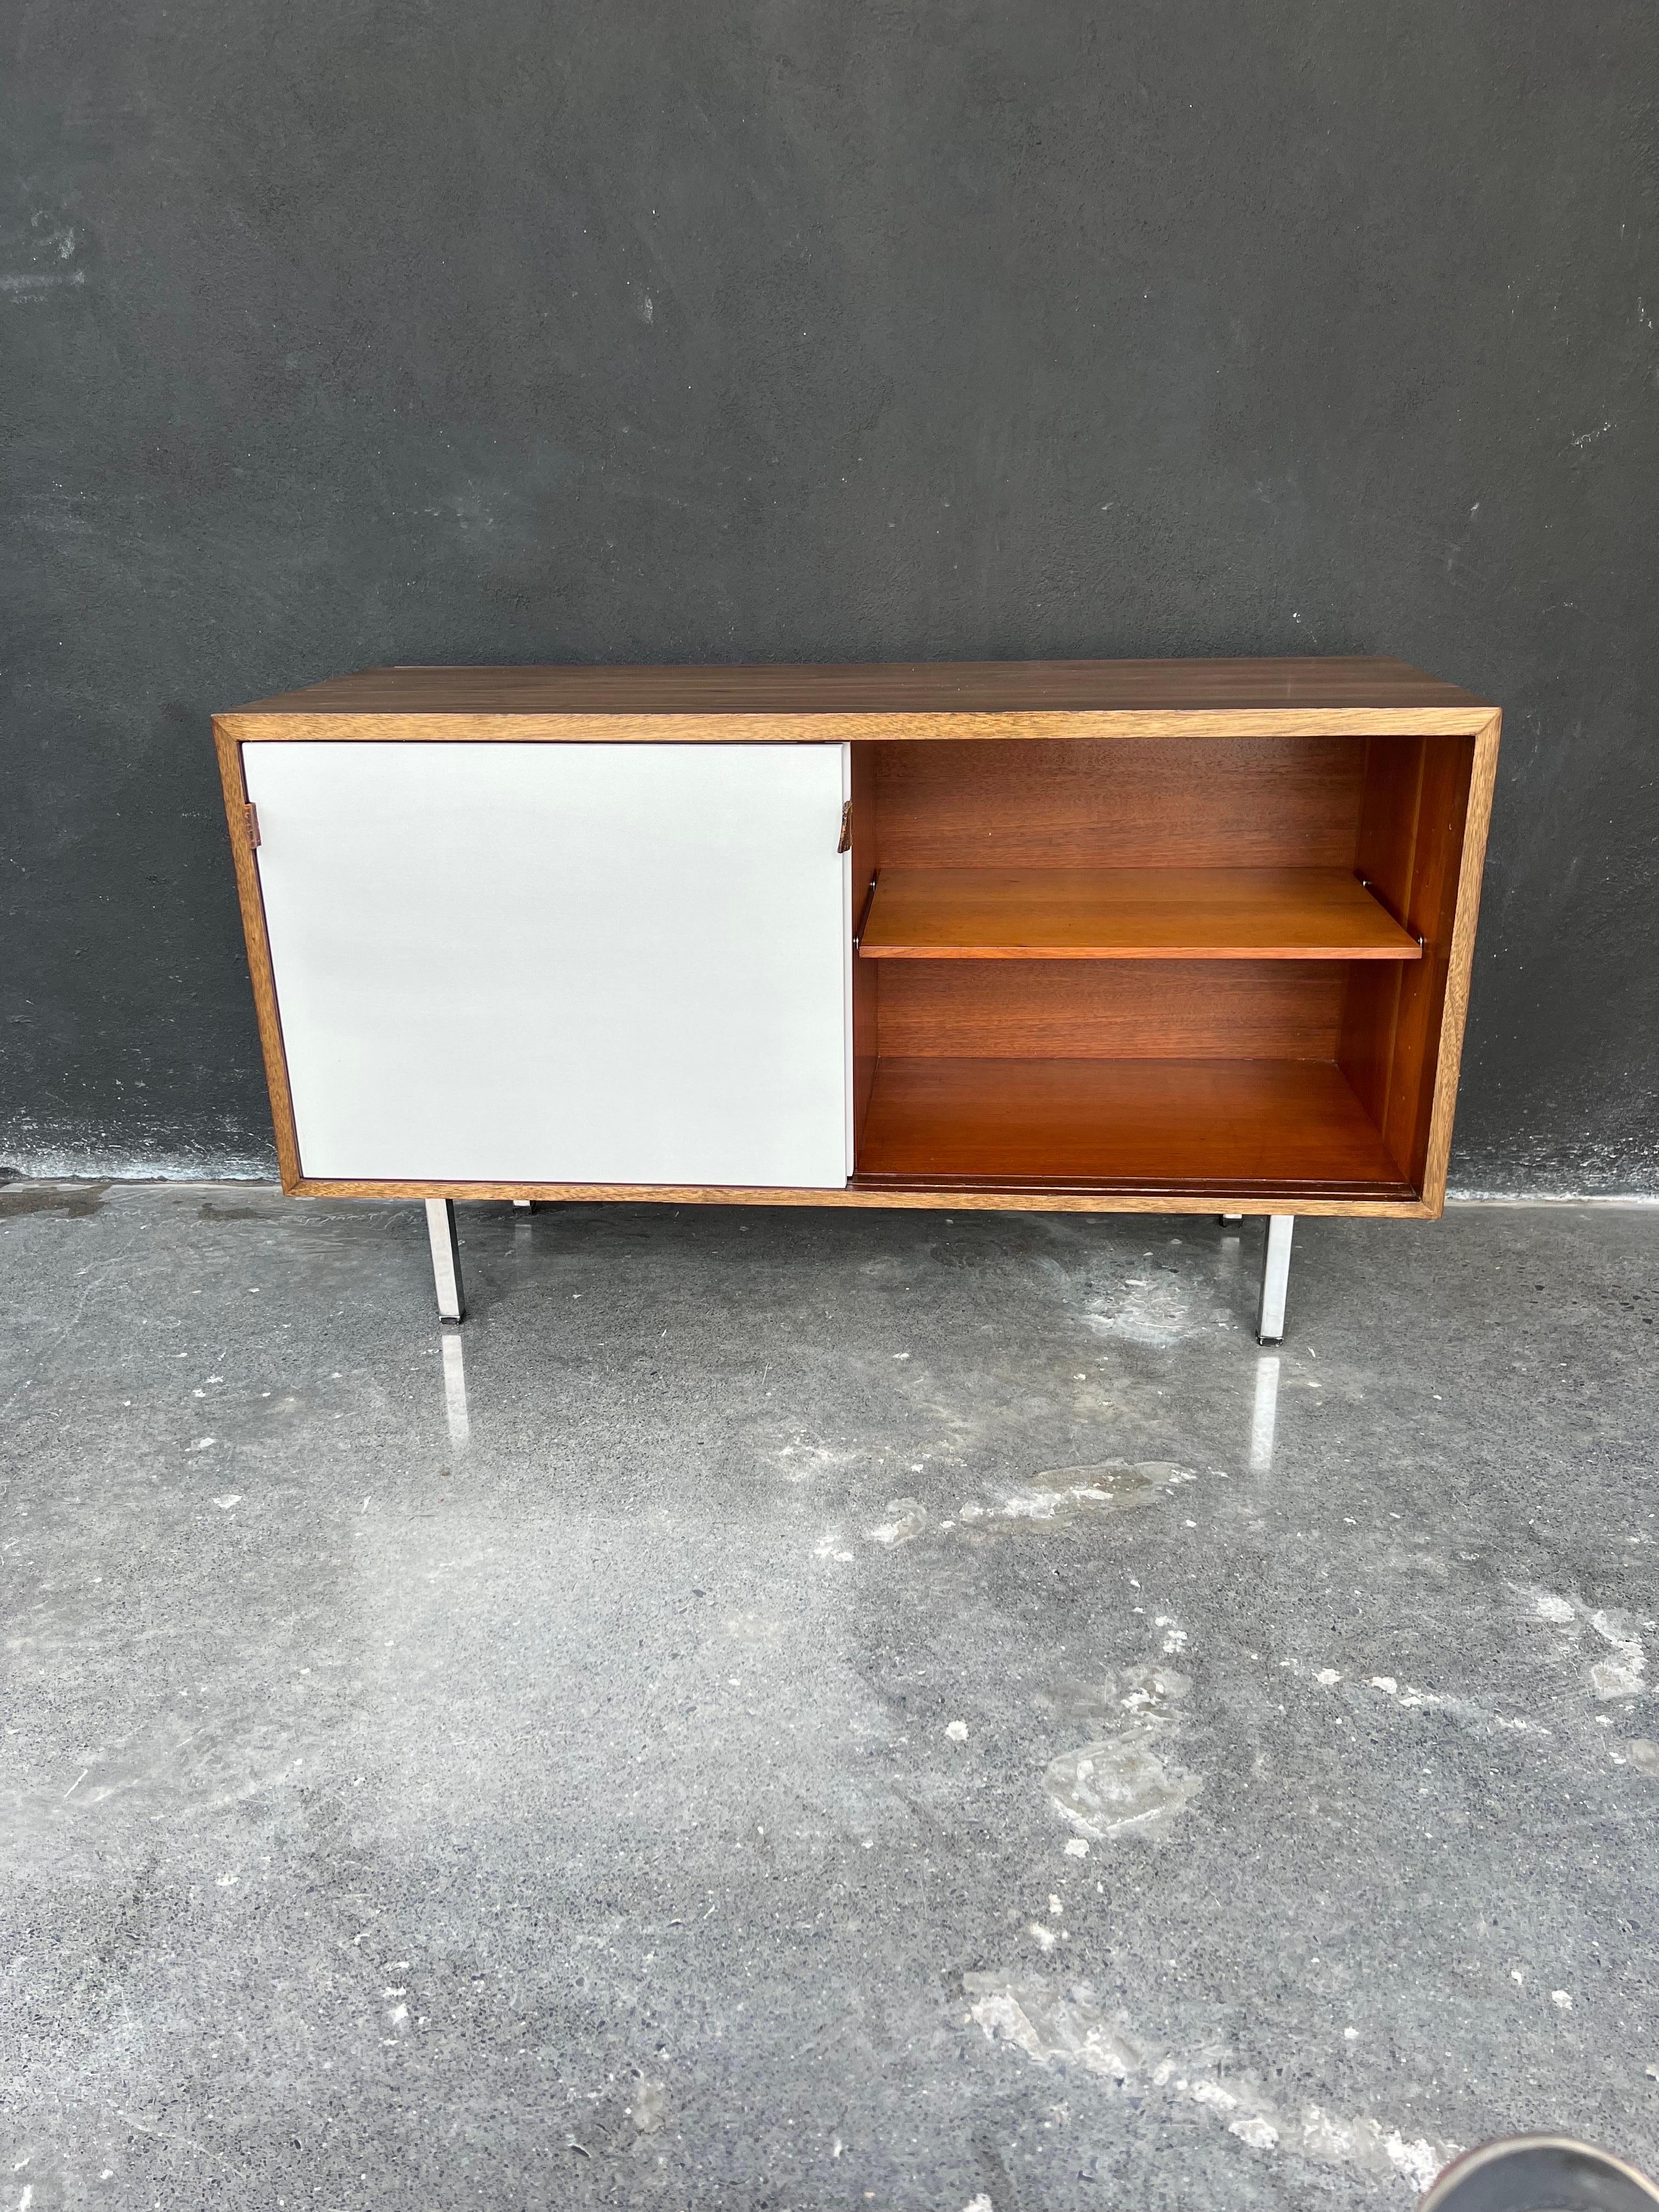 As part of the furniture of Cydsa (Celulosa y Derivados, S.A.) founded in 1945 in Mexico, credenza in walnut, with two shelves by side, restored on the outside and changing the colors of the two doors to give it that new cheerful touch, ready to be